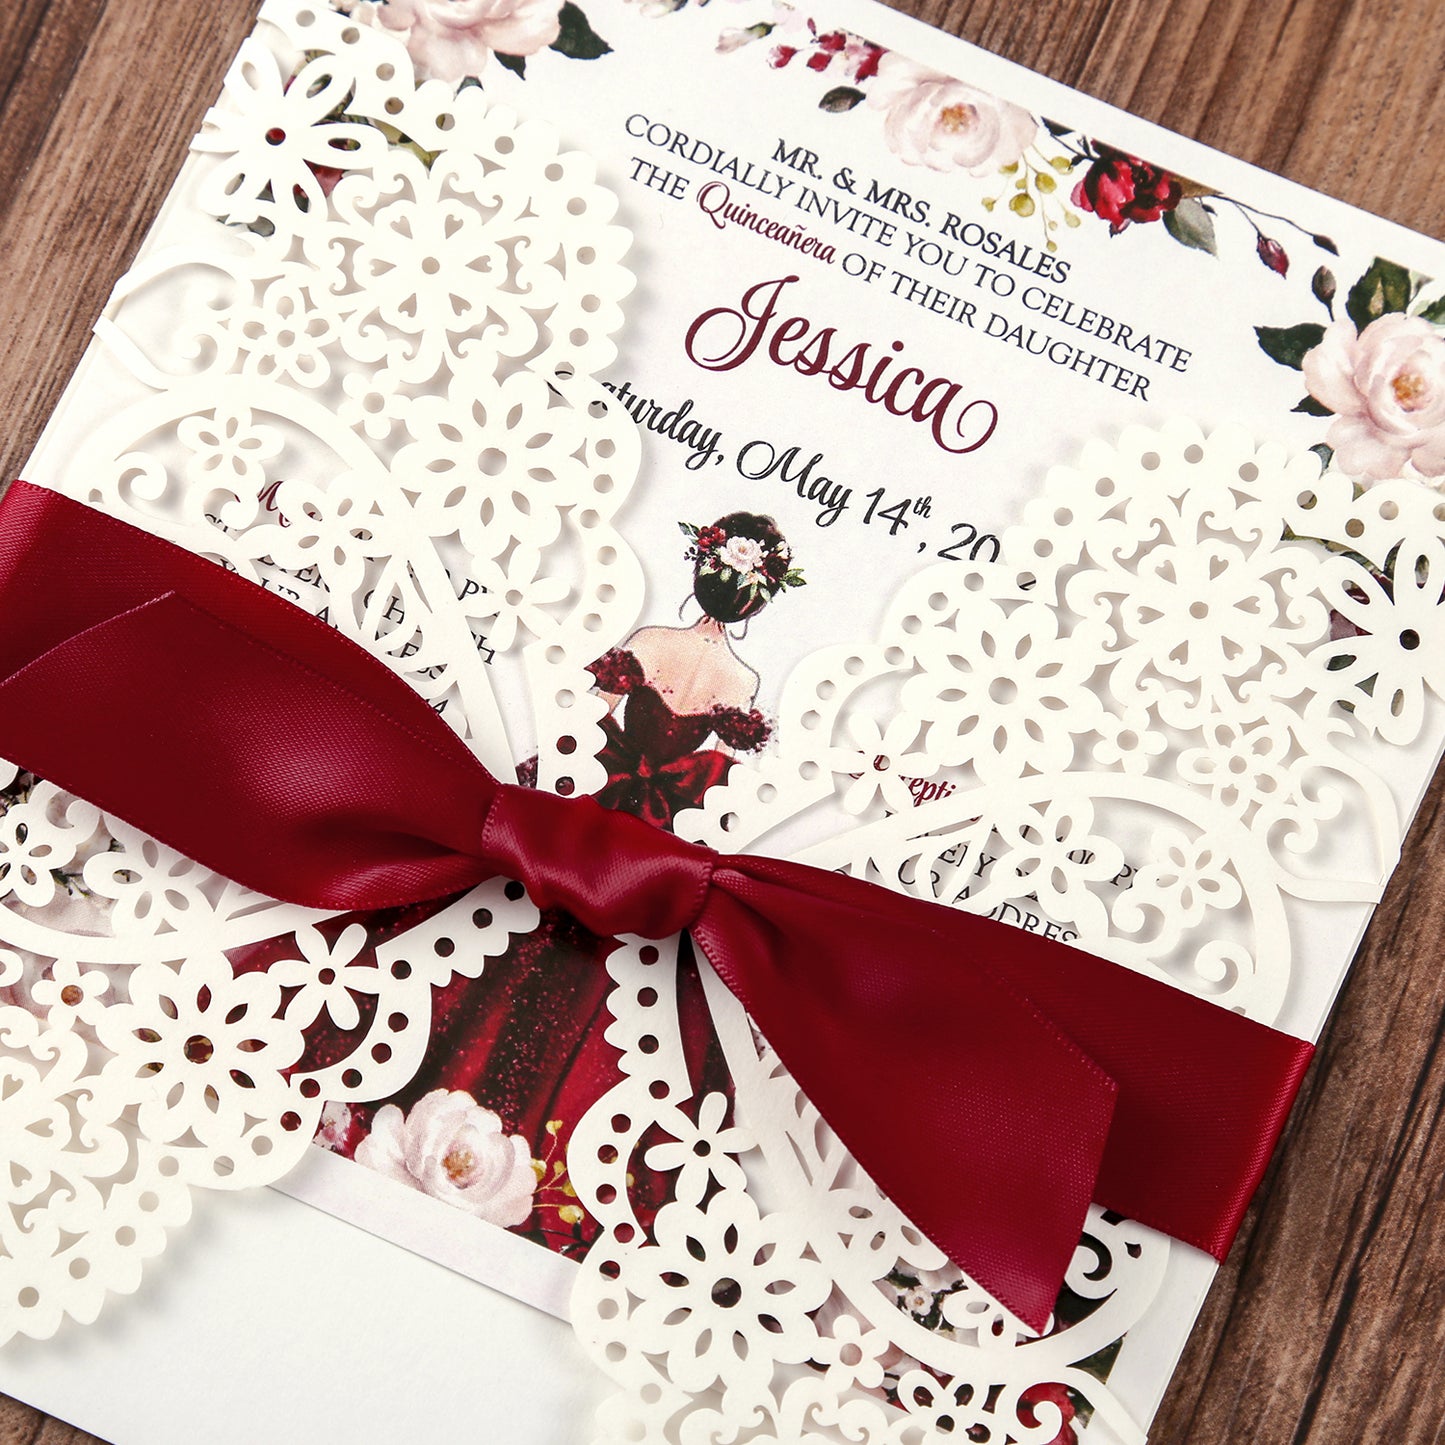 Square Invitations Cards With Burgundy Ribbon For Quinceanera - DorisHome